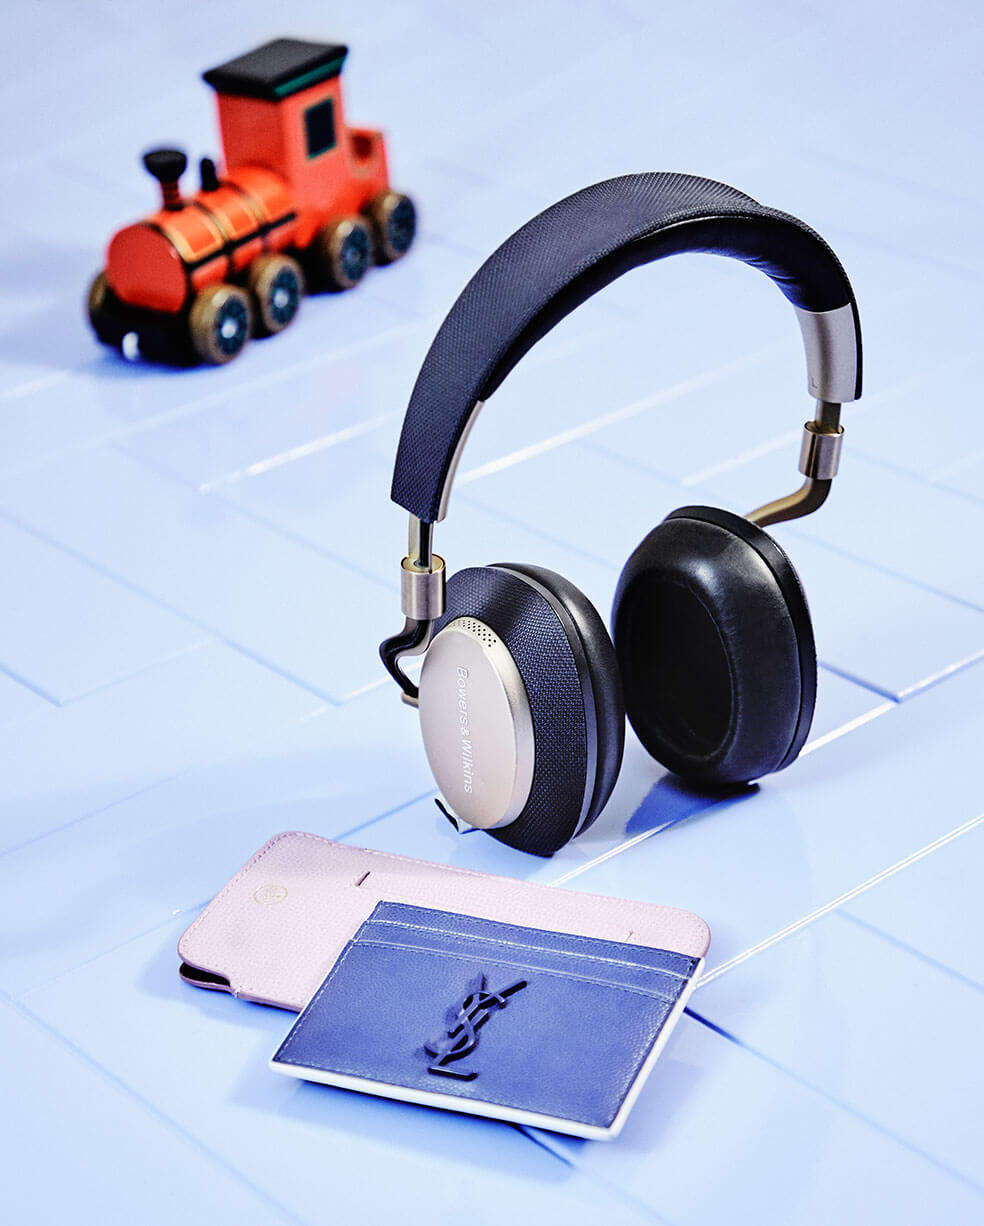 A pair of headphones and leather card and phone holder